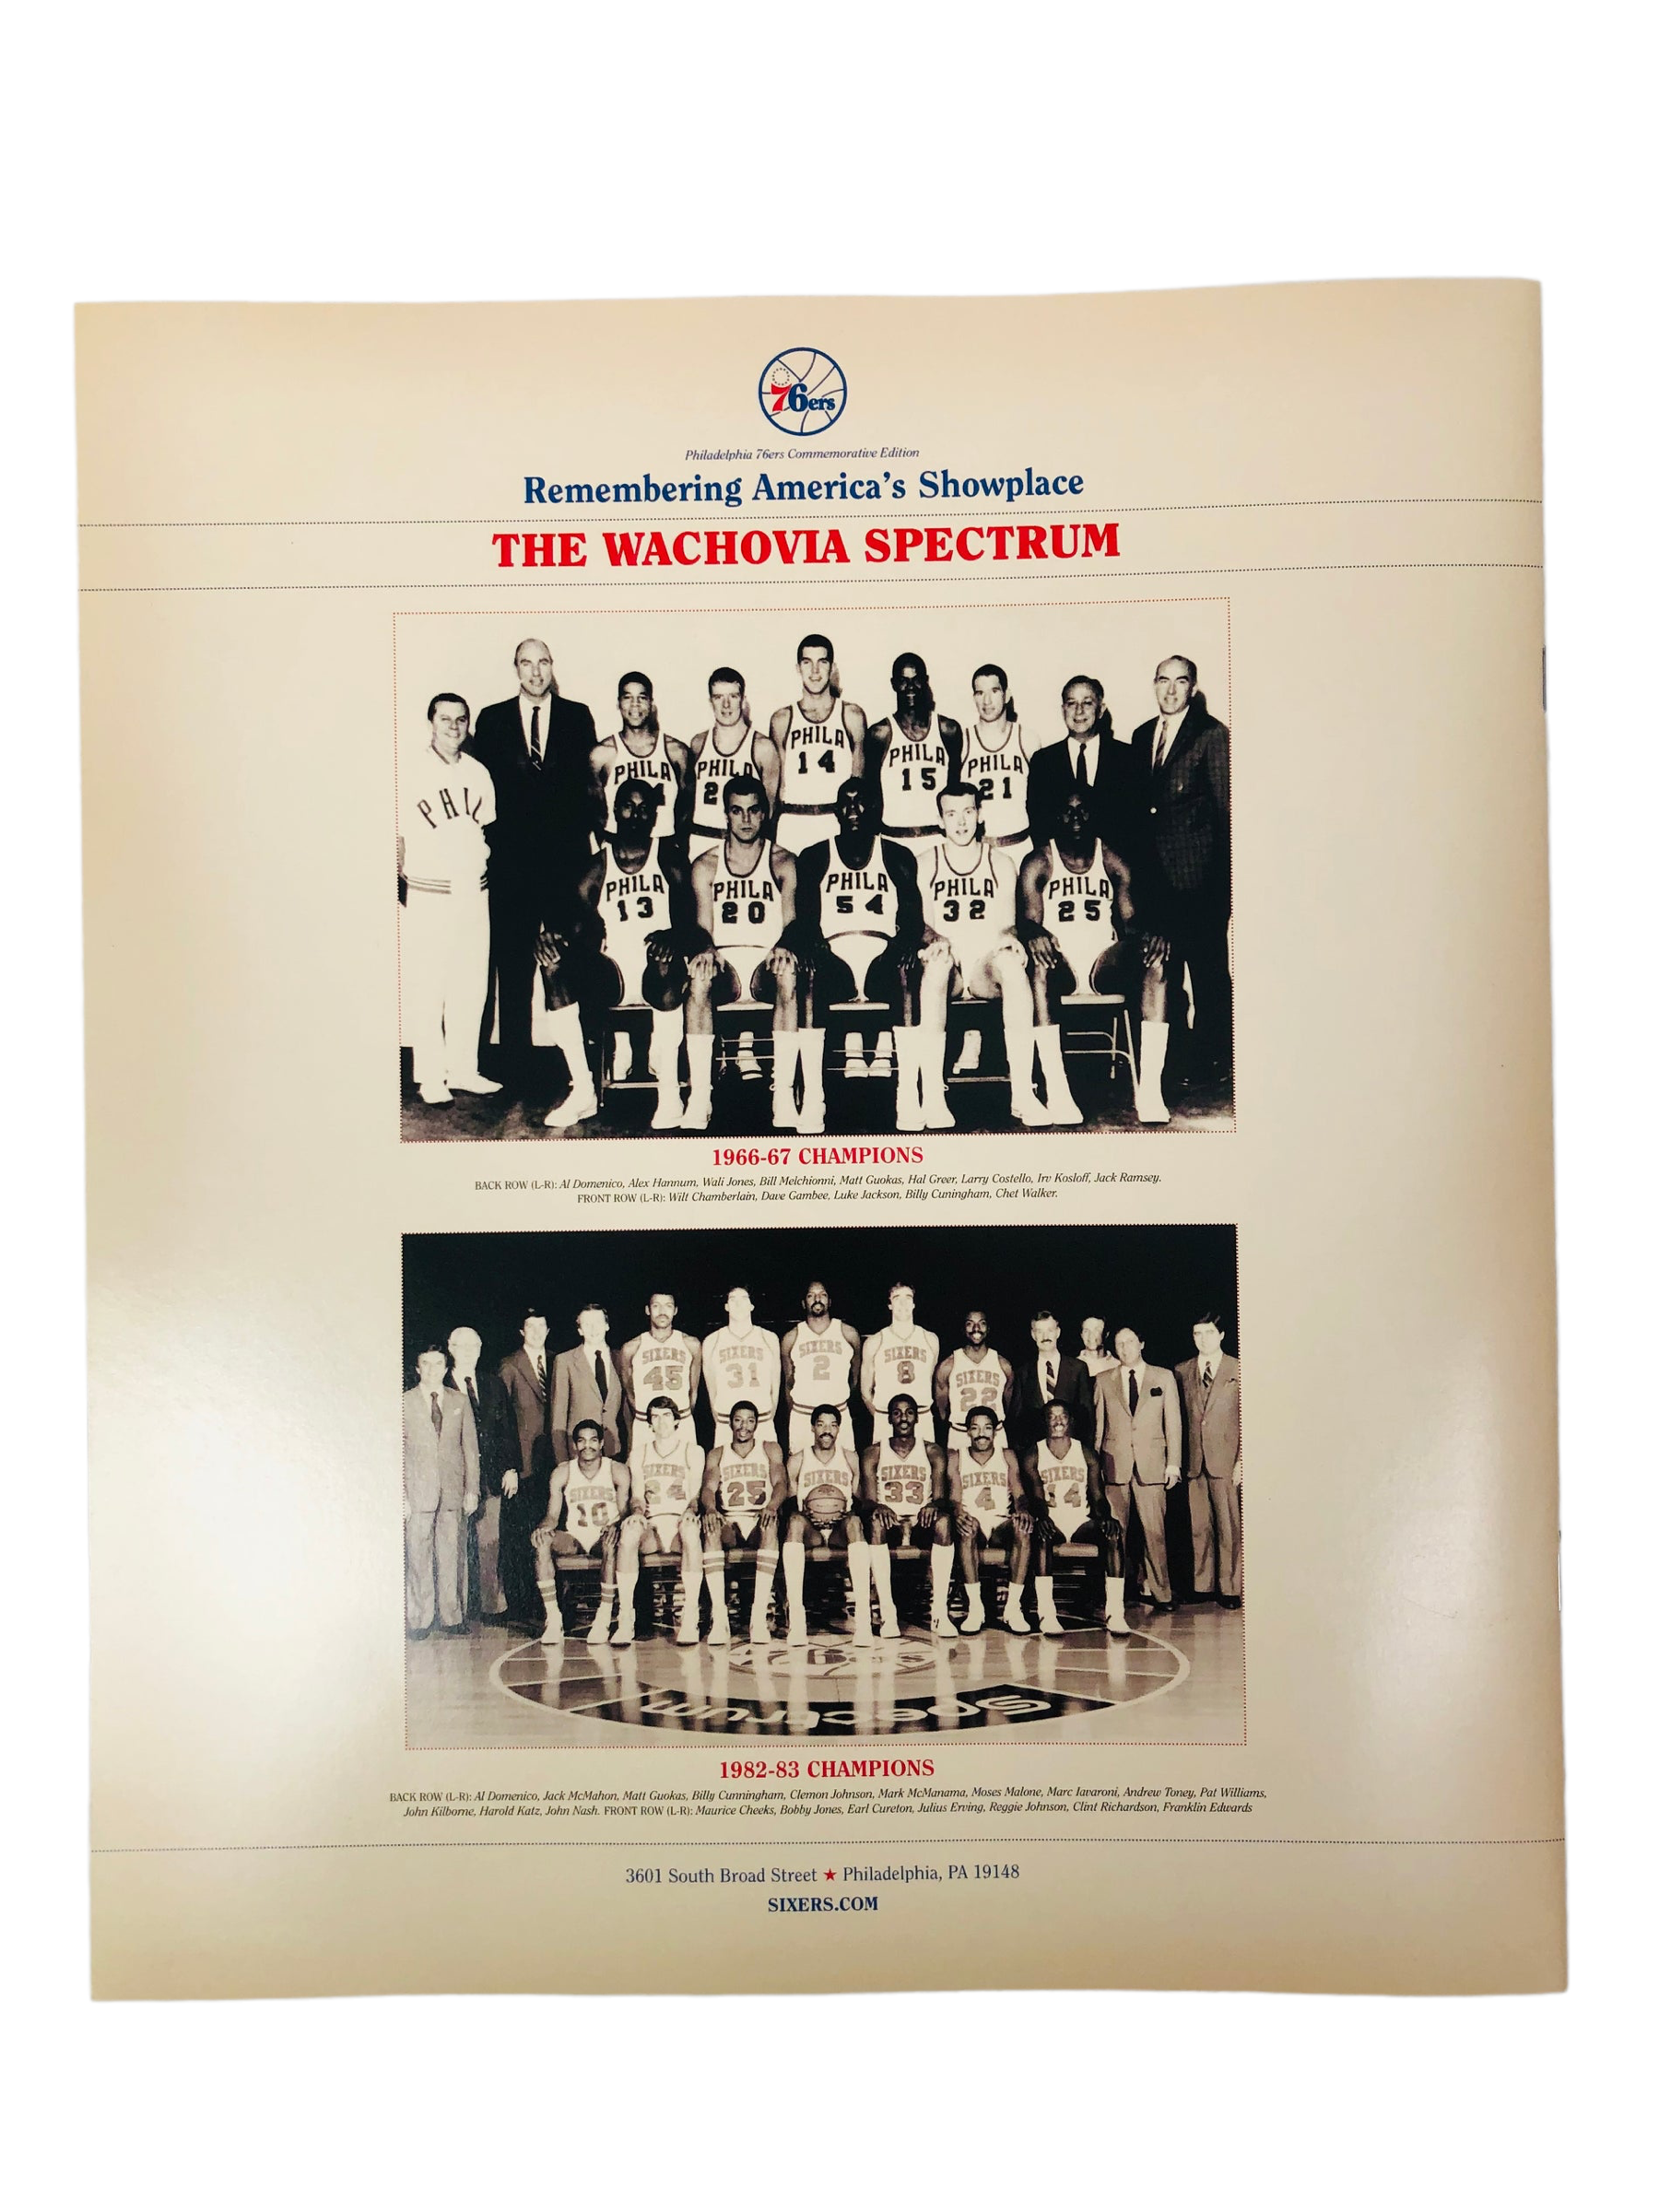 Last #sixers game at #spectrum poster #2009 #bcbc